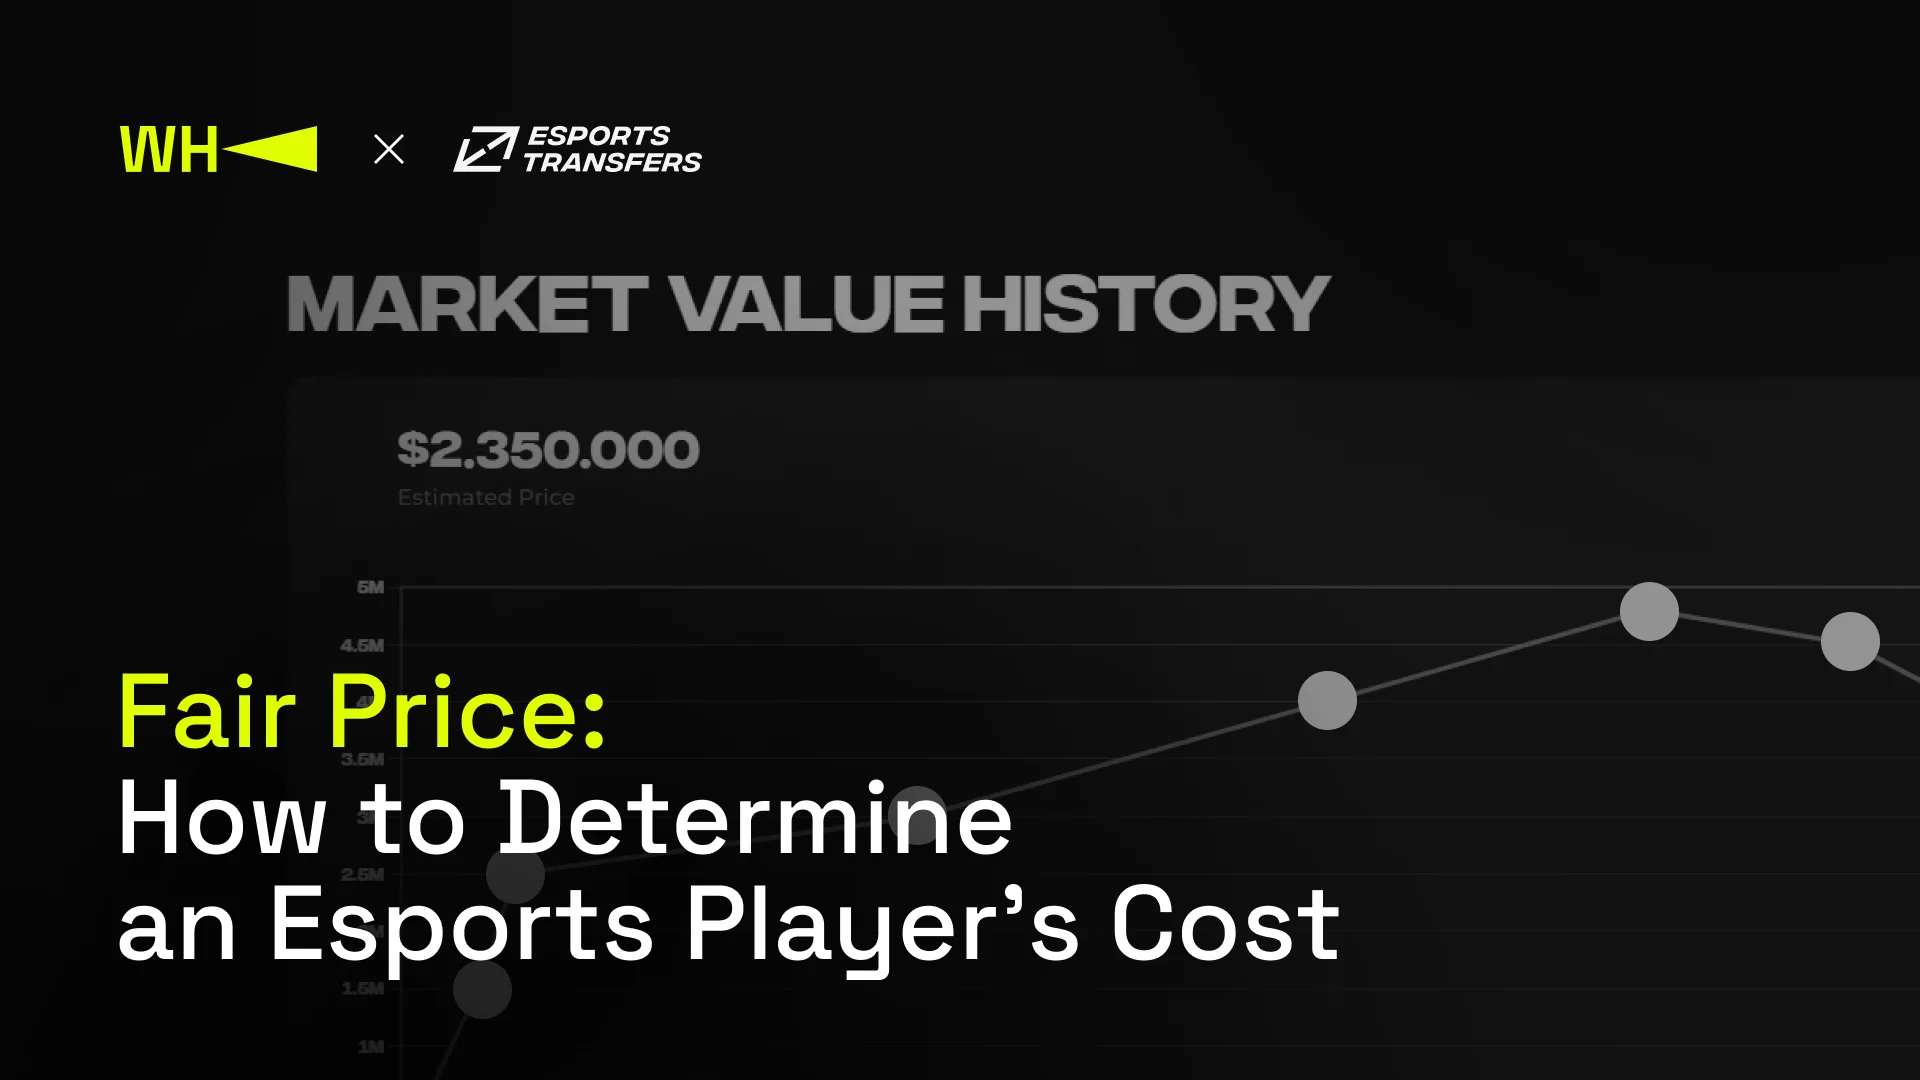 Fair Price: How to Determine an Esports Player’s Cost